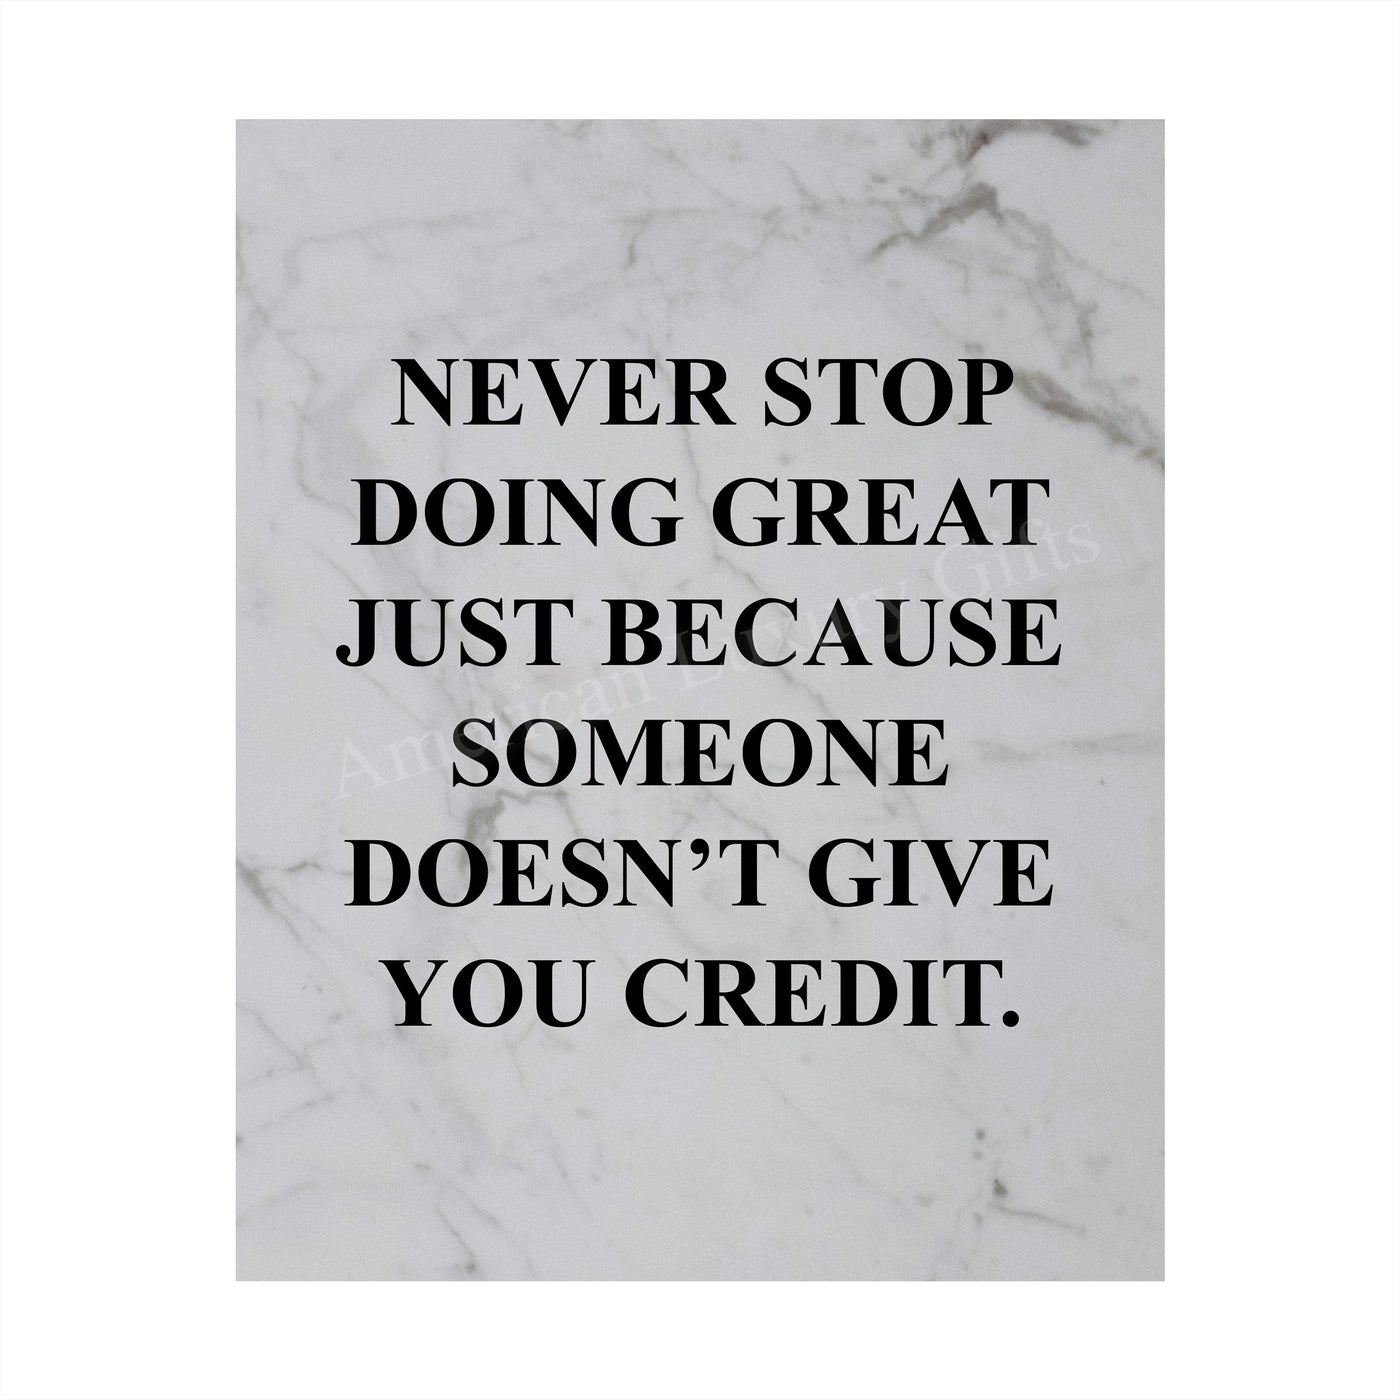 Never Stop Doing Great Motivational Wall Art Sign -8 x 10" Modern Typographic Poster Print-Ready to Frame. Inspirational Home-Office-Desk Decor. Perfect Classroom Sign! Great Gift of Motivation!